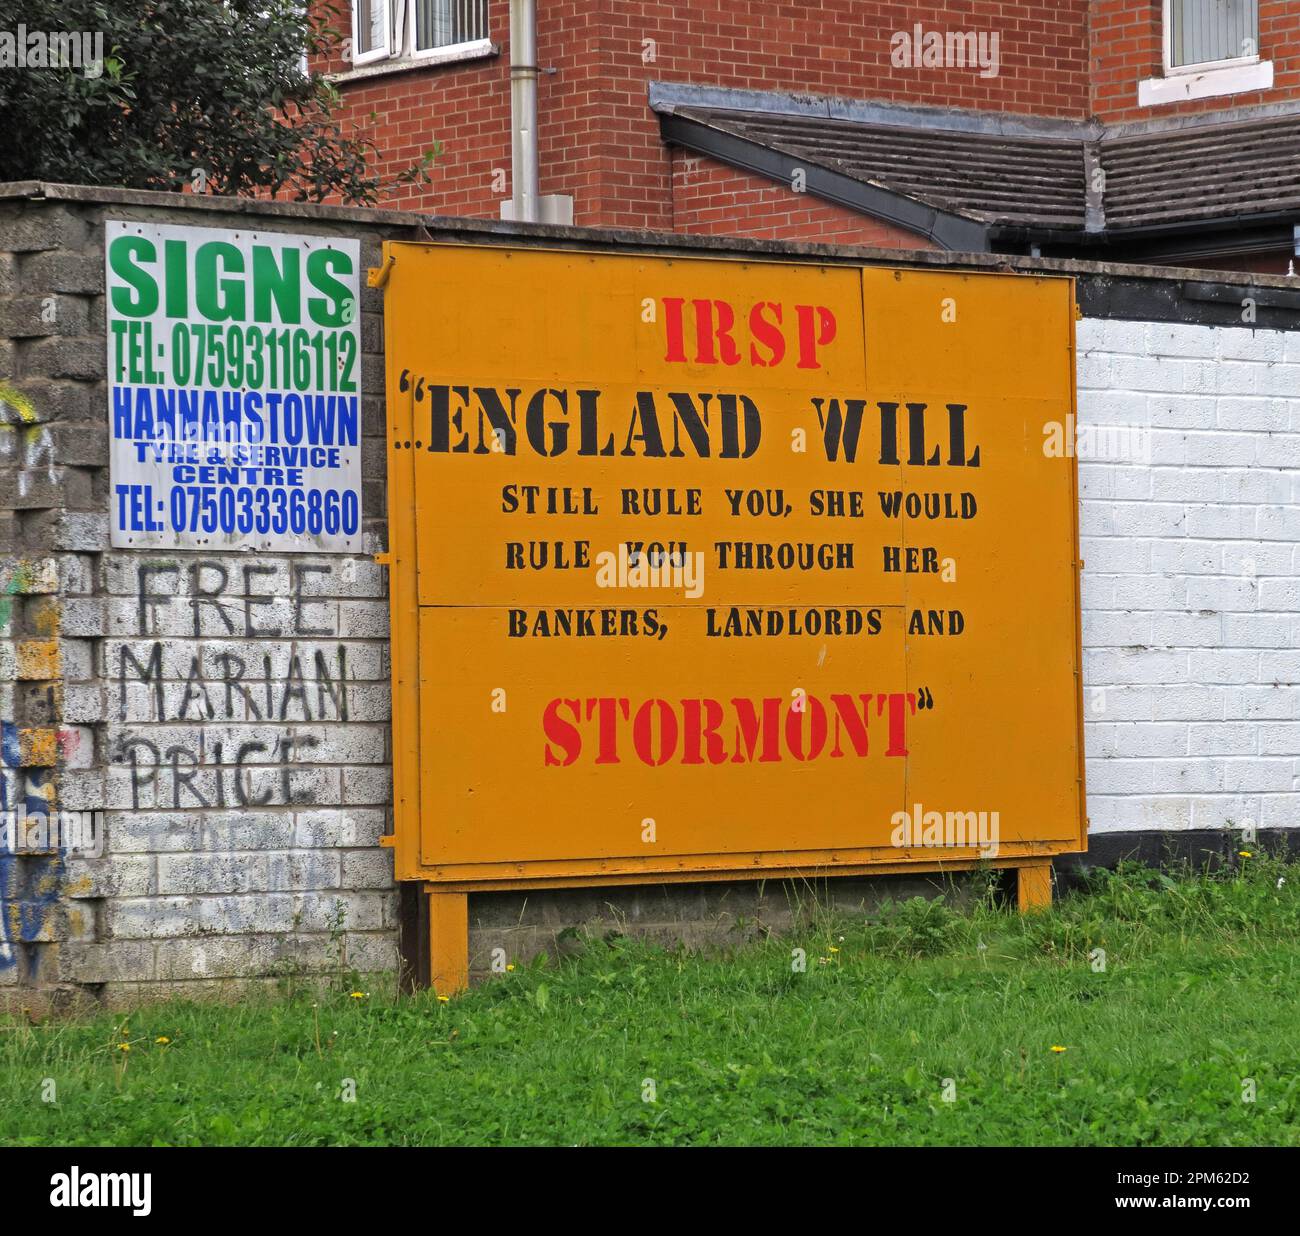 IRSP graffiti - England will still rule you, she would rule you through her bankers, landlords and Stormont, Irish Republican Socialist Party Stock Photo